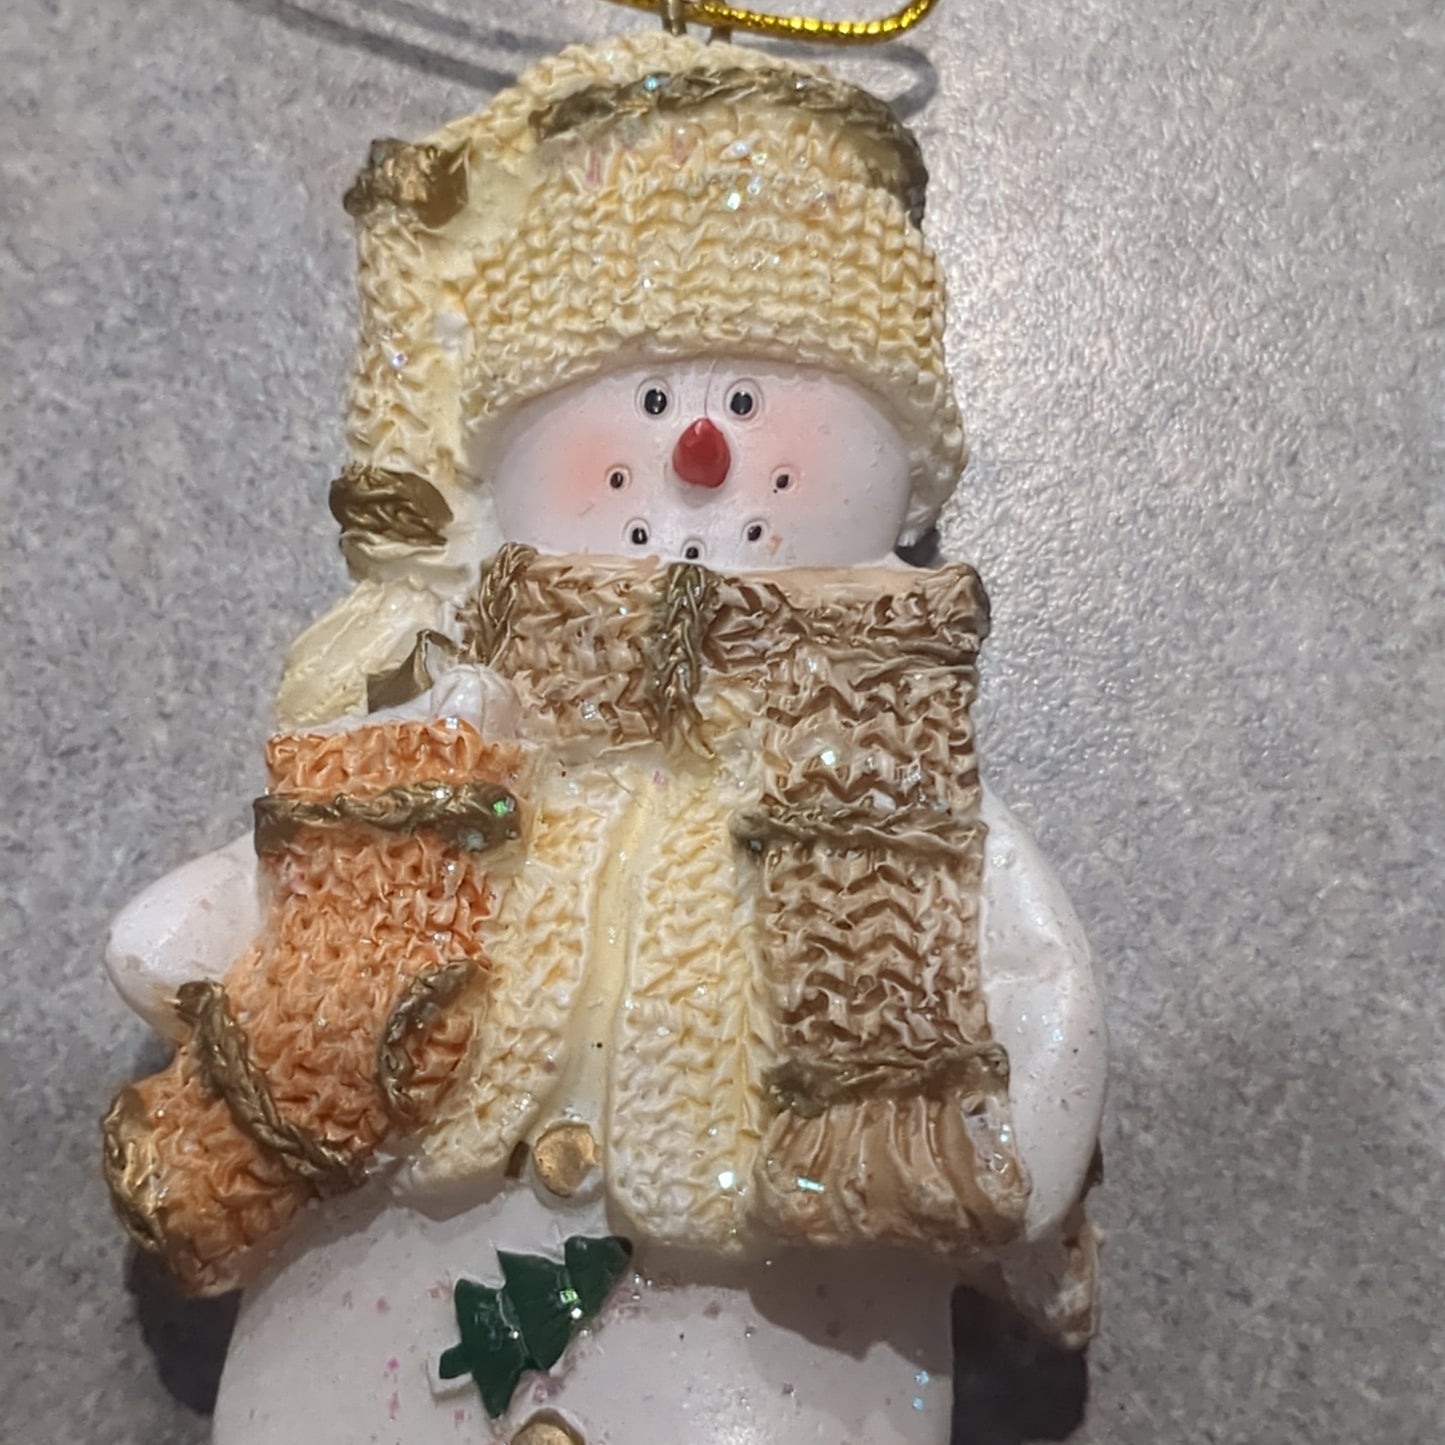 Polycrylic snowman ornament with stocking yellow